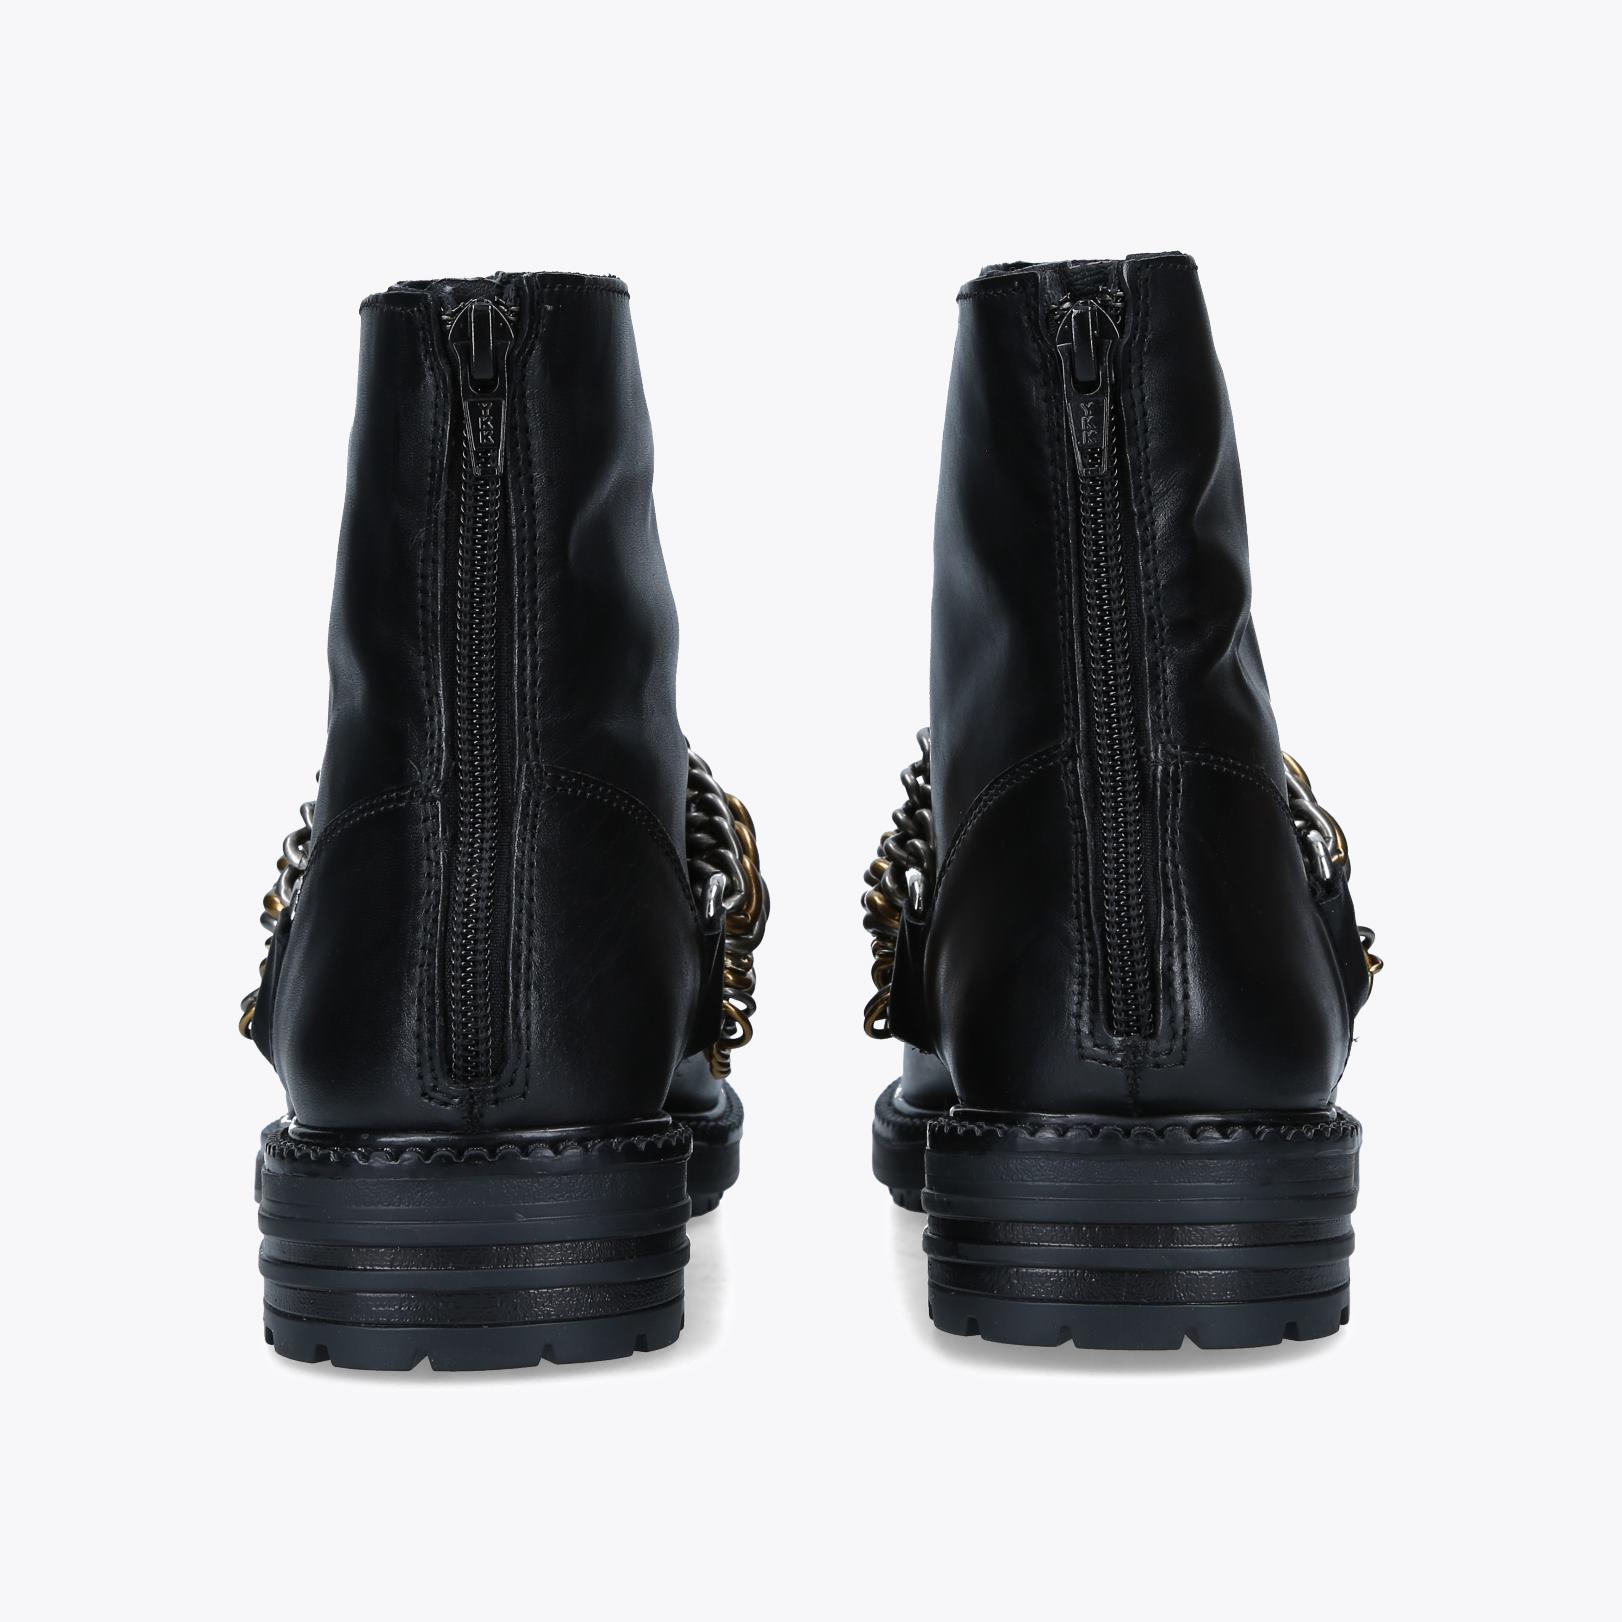 STEFAN Black Multi Tonal Chain Detail Eagle Embellished Ankle Boot by ...